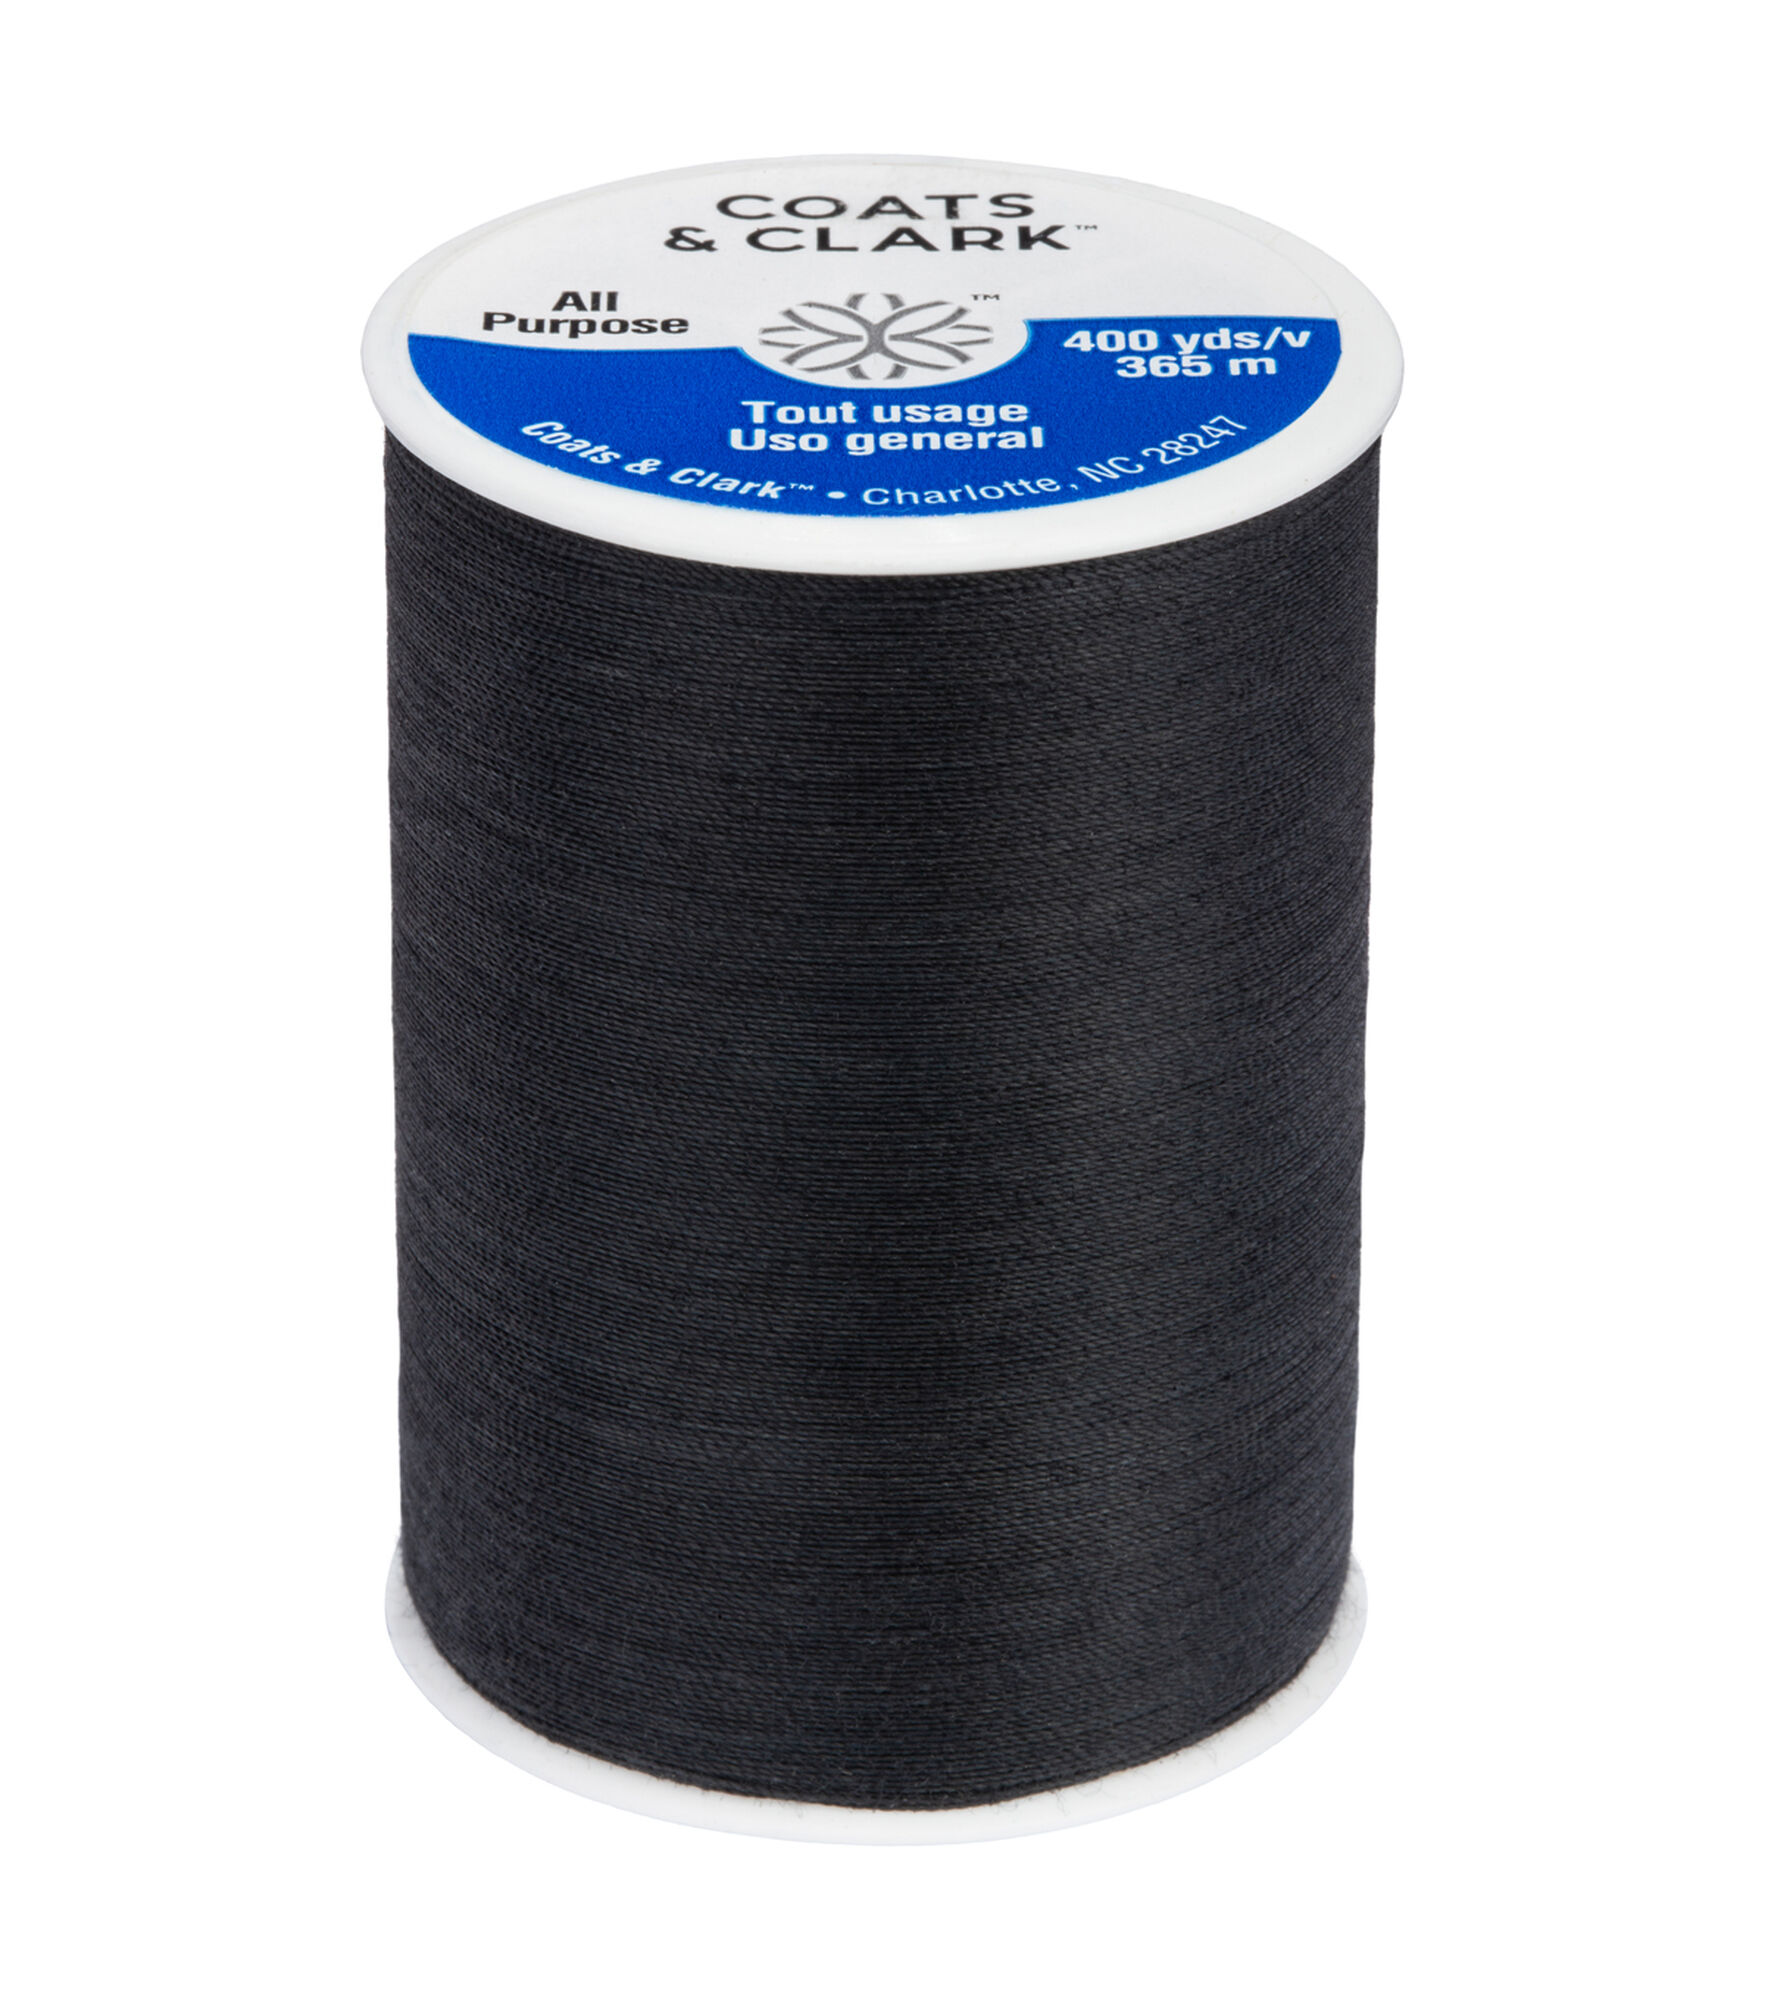 Set of 10 Sewing Threads Black Thread for Sewing Machine, 1000